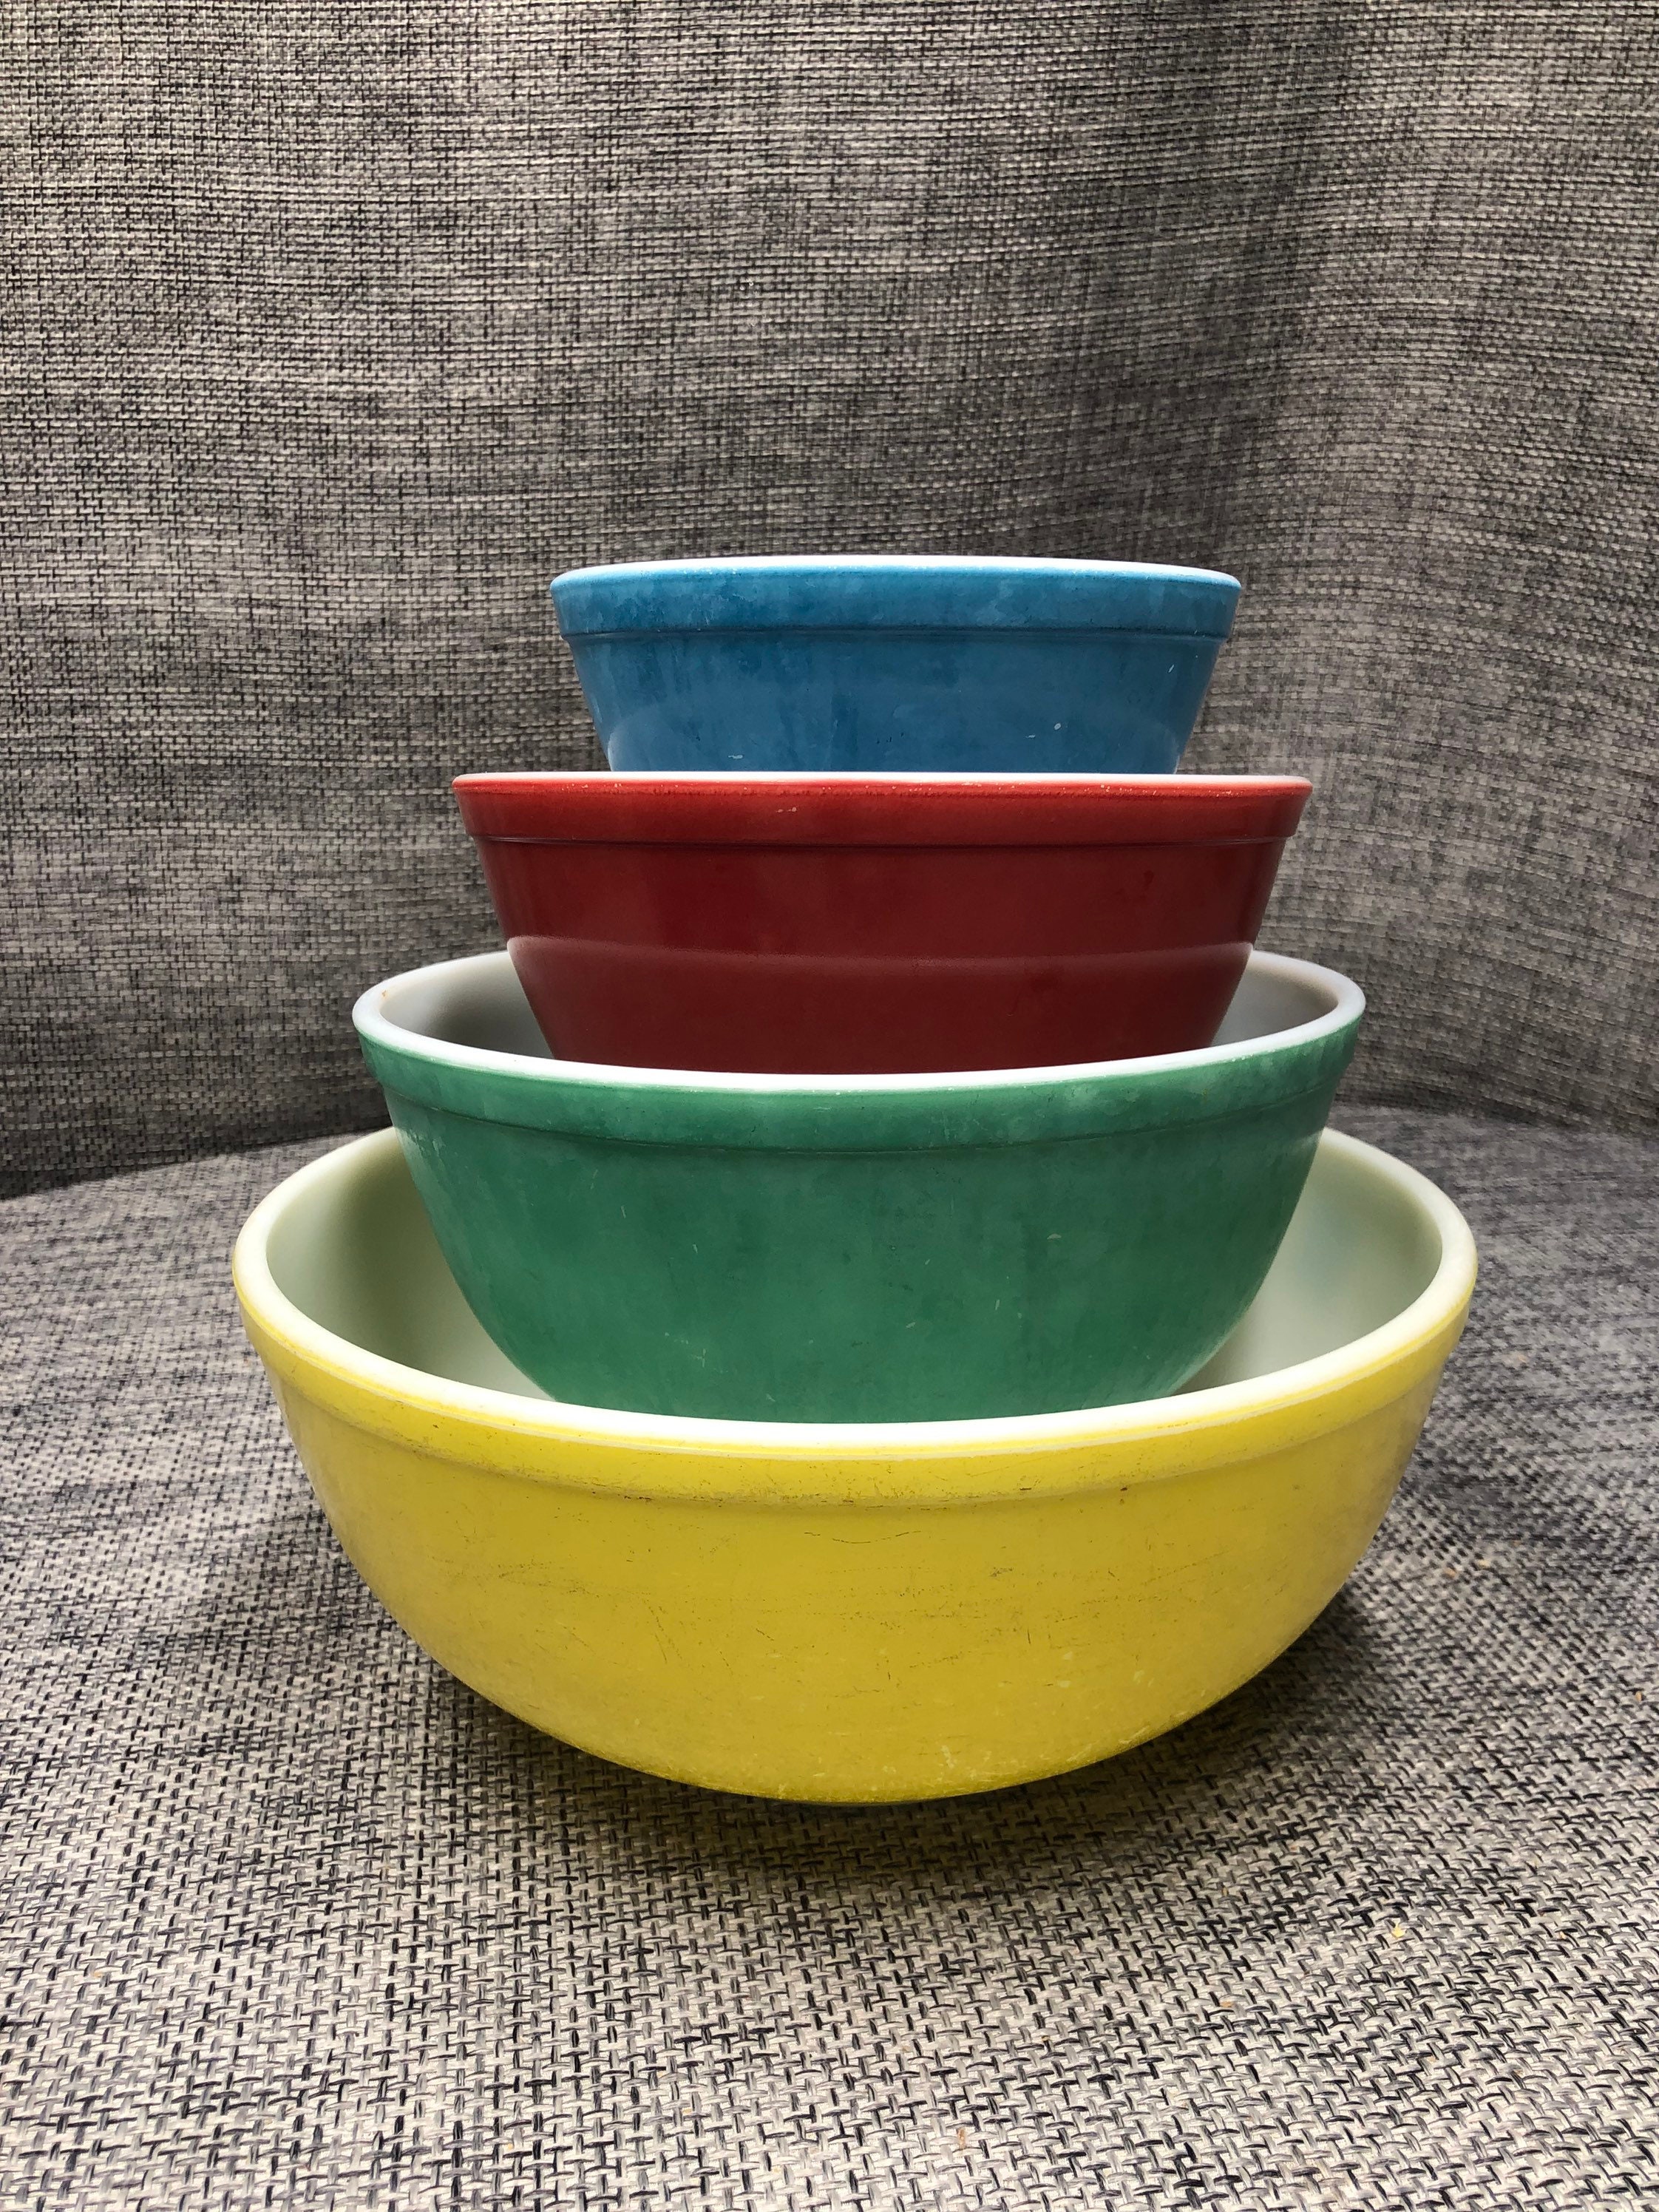 Faded Red Pyrex Primary Color Mixing Bowl, Pyrex Nesting Bowl, Red Pyrex  Bowl 401, Poor Condition 